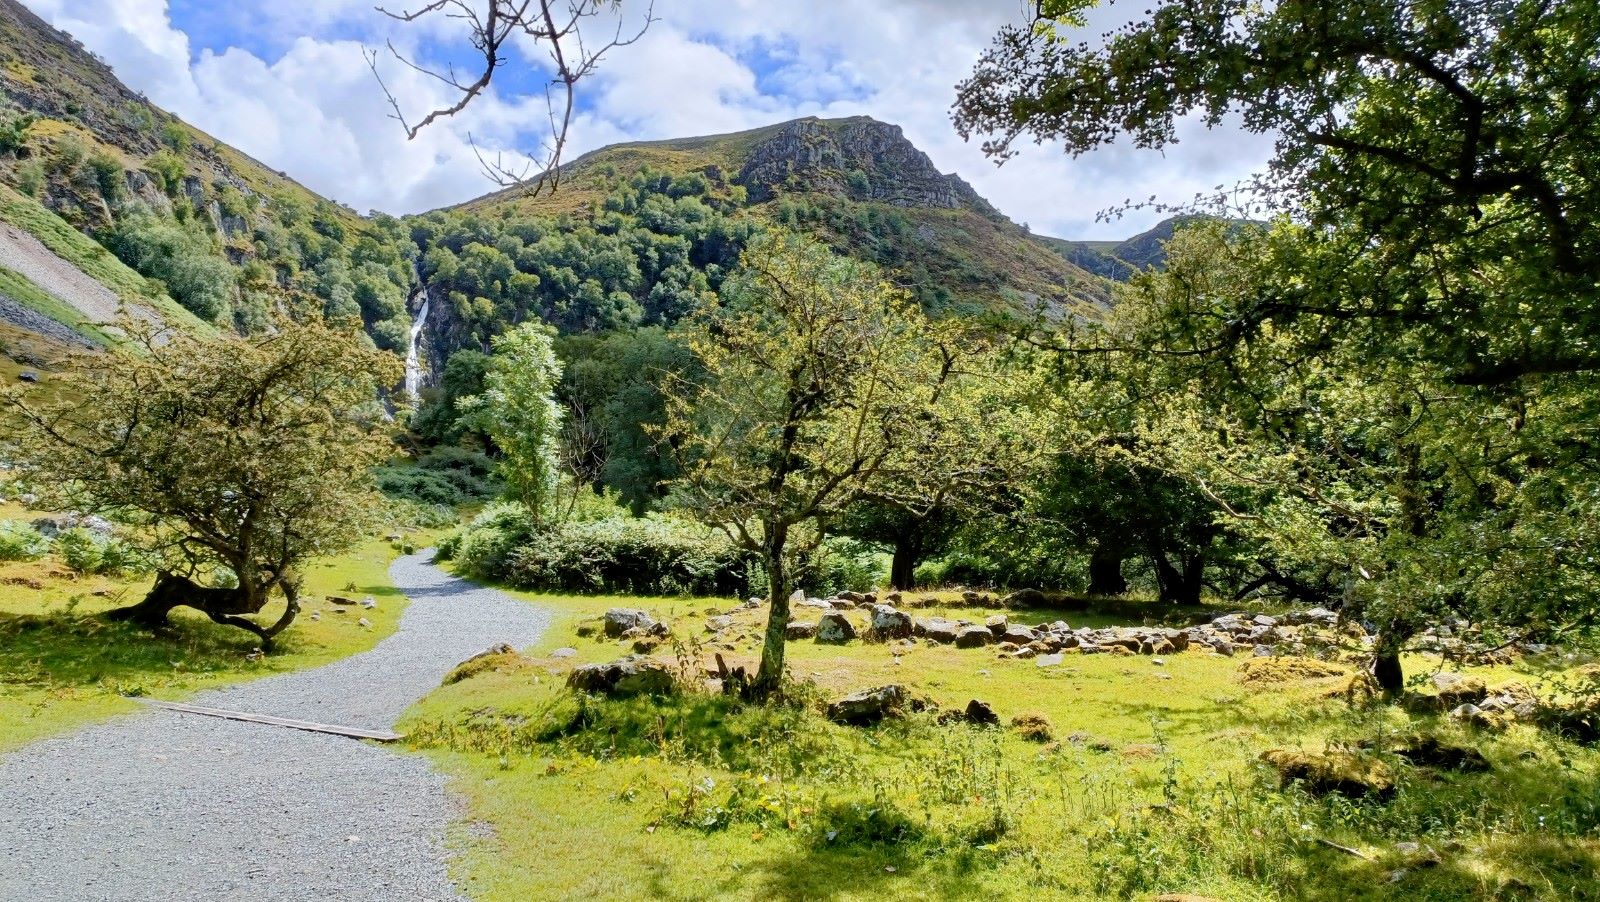 Accessible walk to Aber falls beautiful waterfall visit in Snowdonia National Park